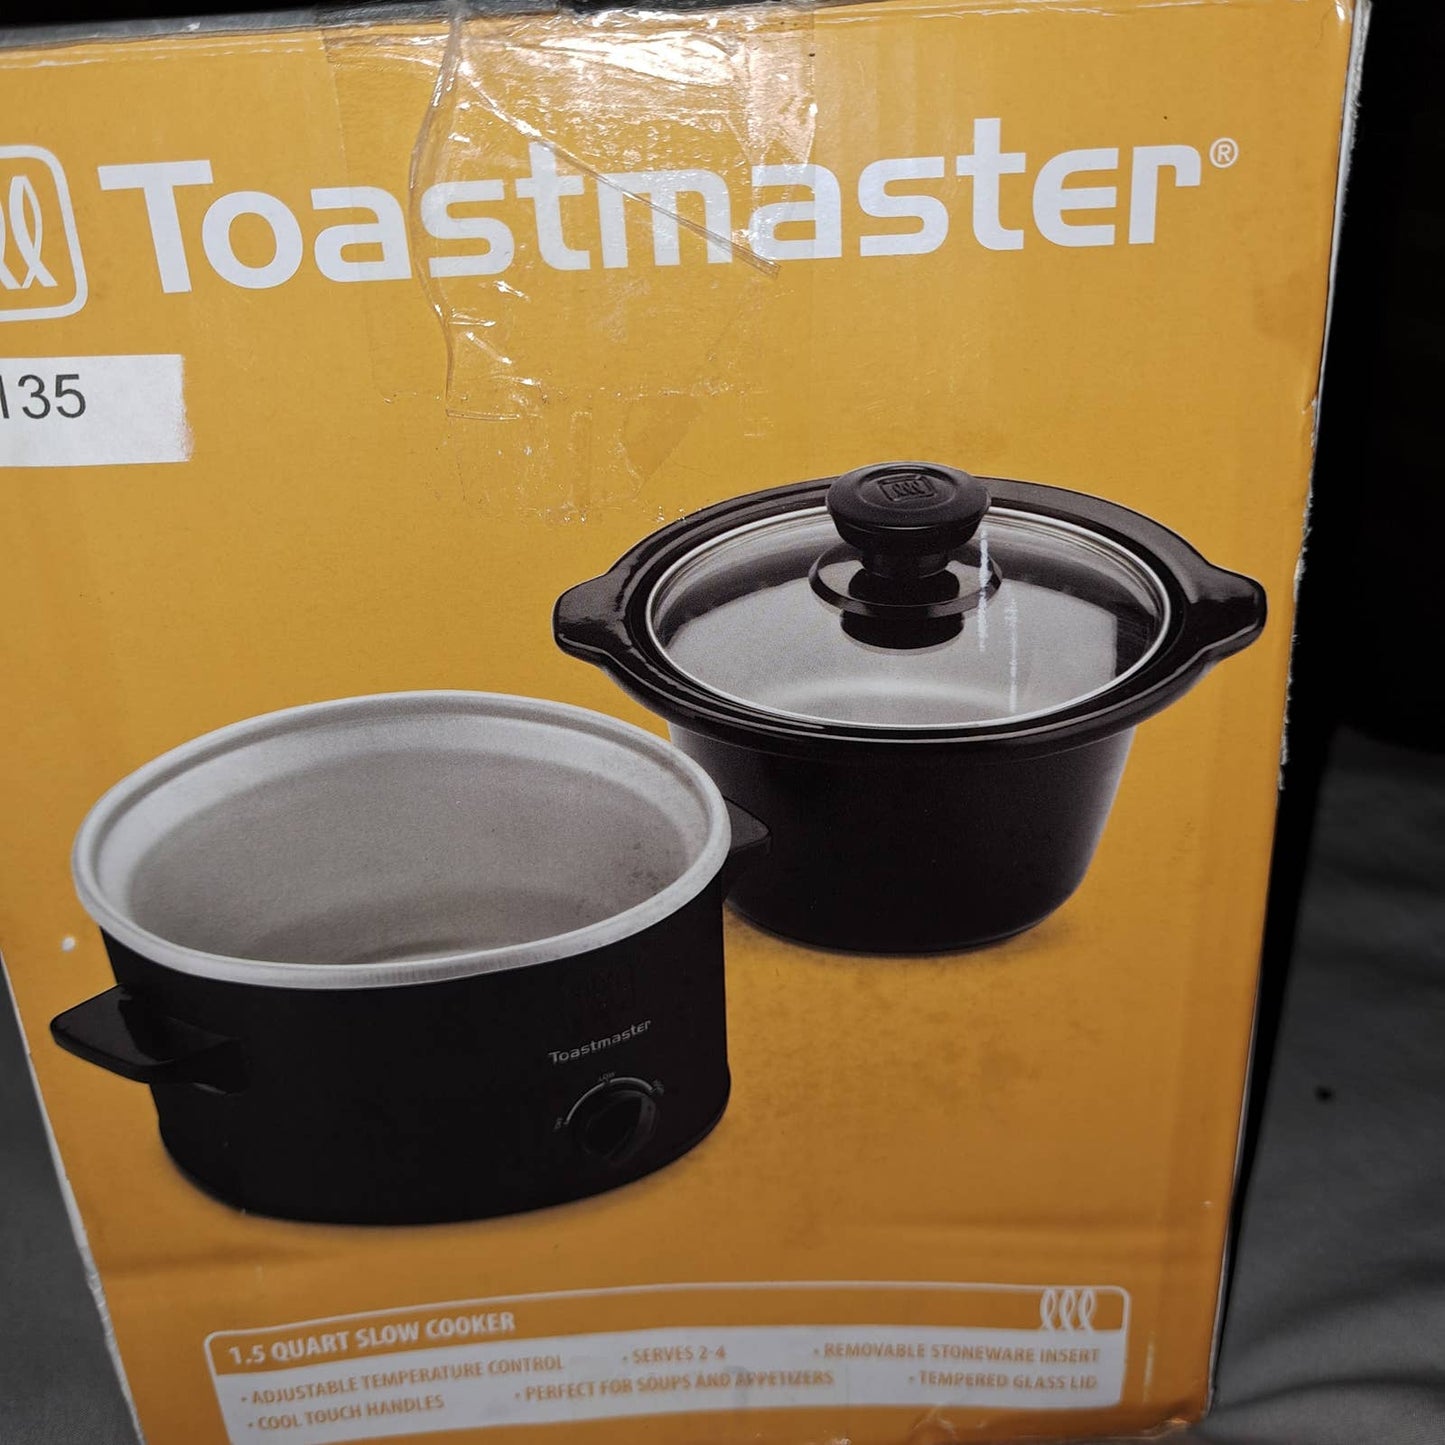 NEW - SEALED Toastmaster 1.5 Quart Slow Cooker Cool Touch Handles